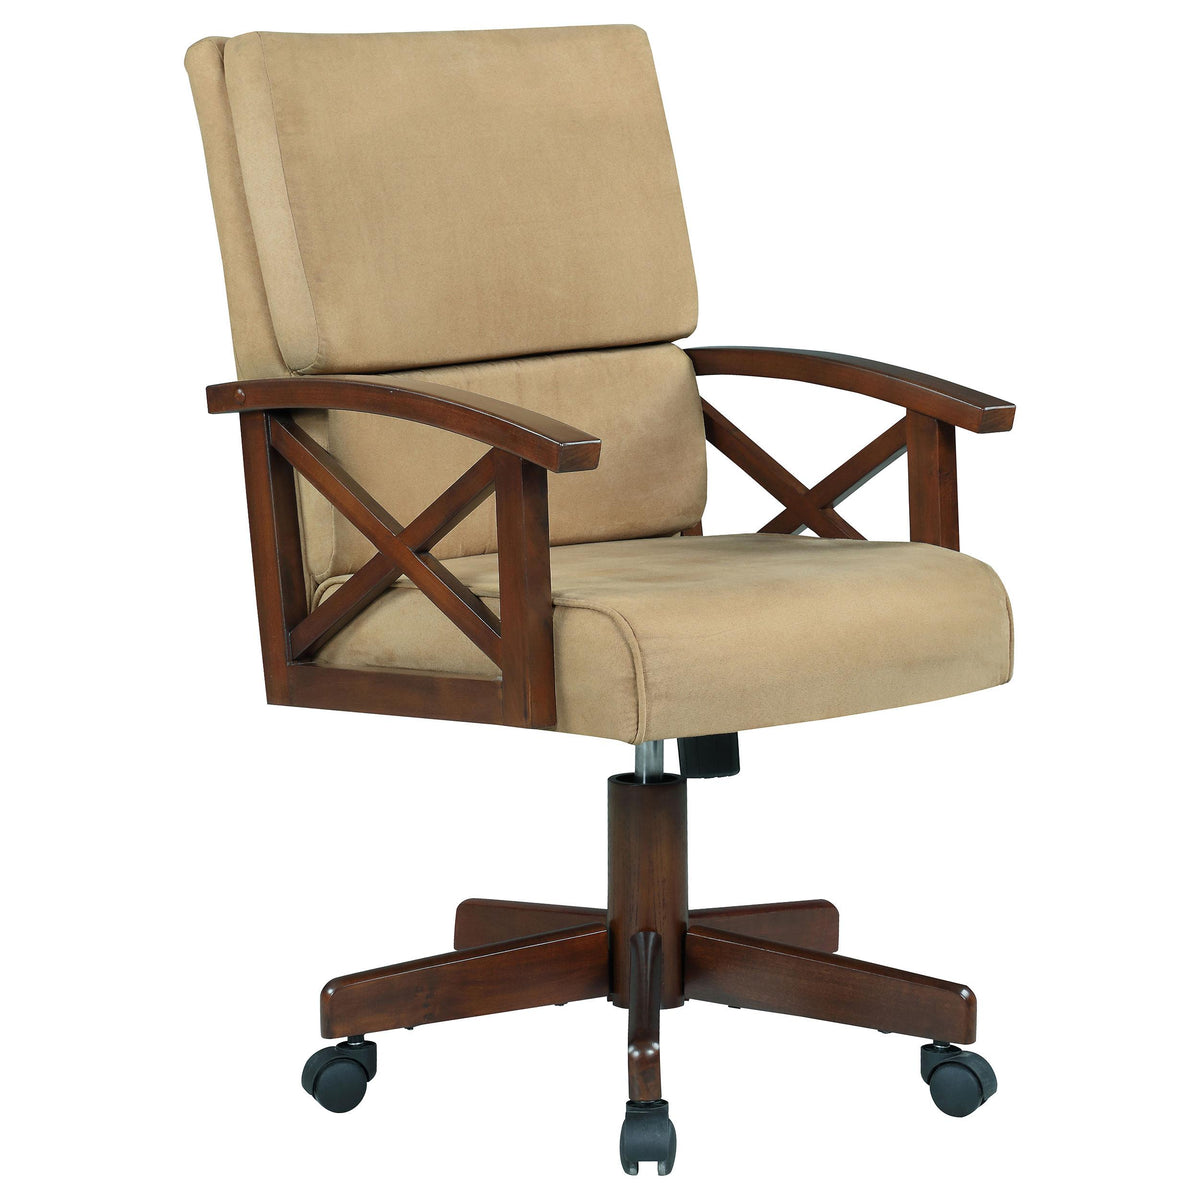 Marietta Upholstered Game Chair Tobacco and Tan  Half Price Furniture